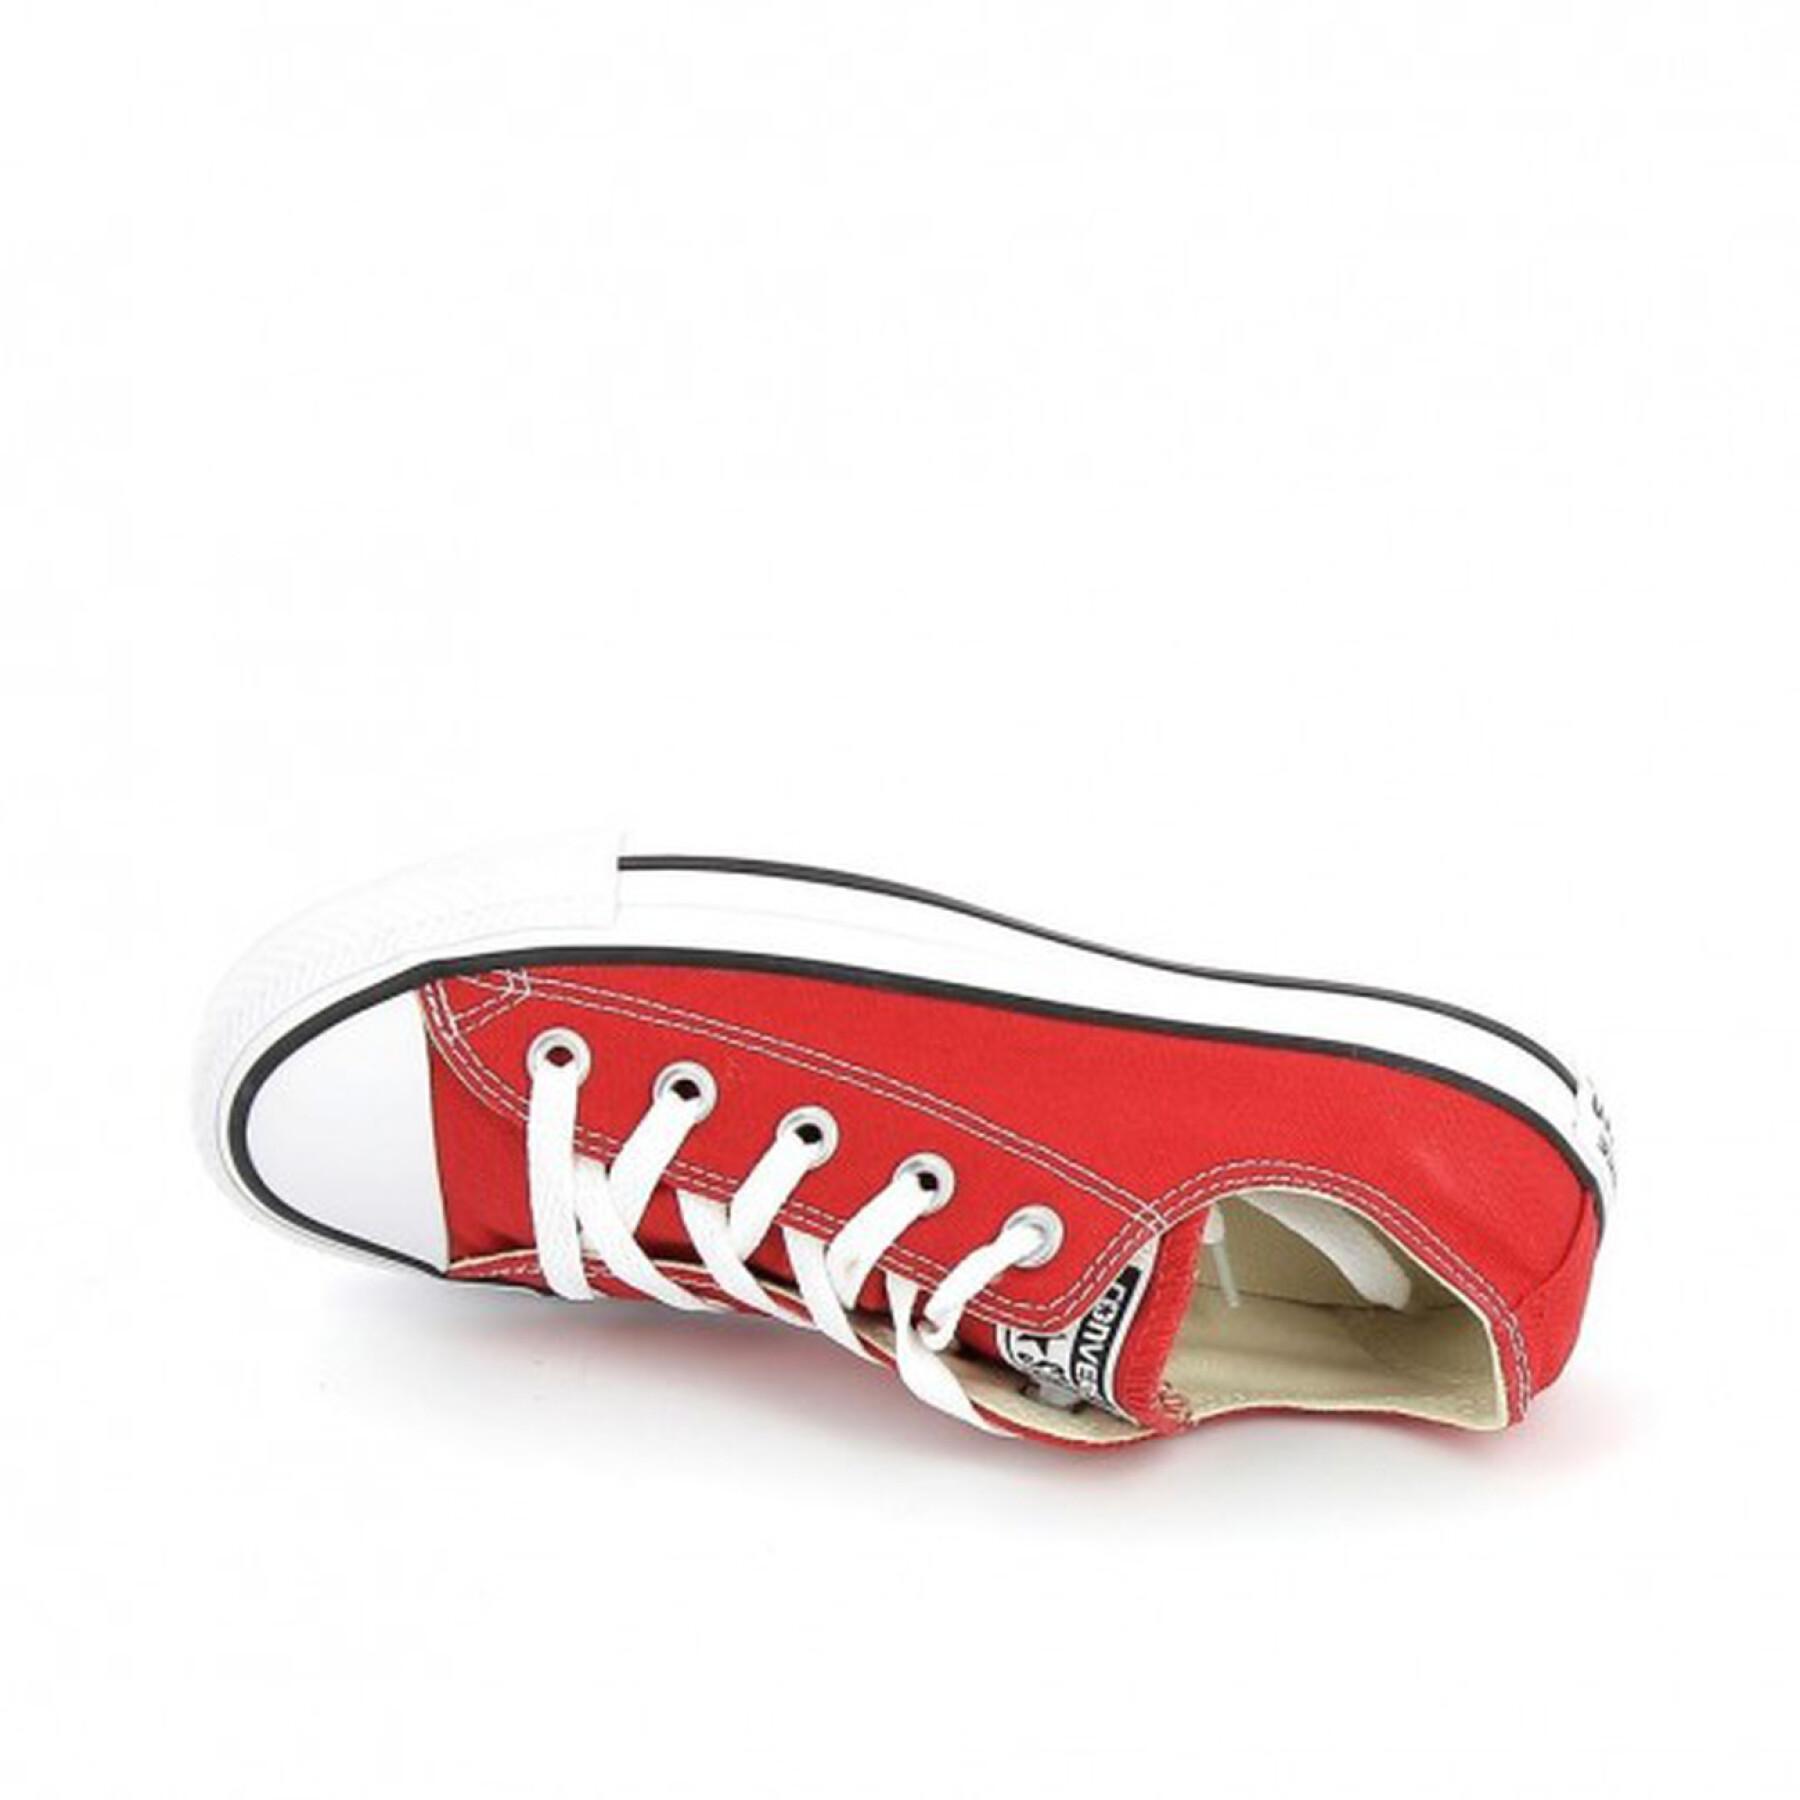 Children's sneakers Converse Chuck Taylor All Star